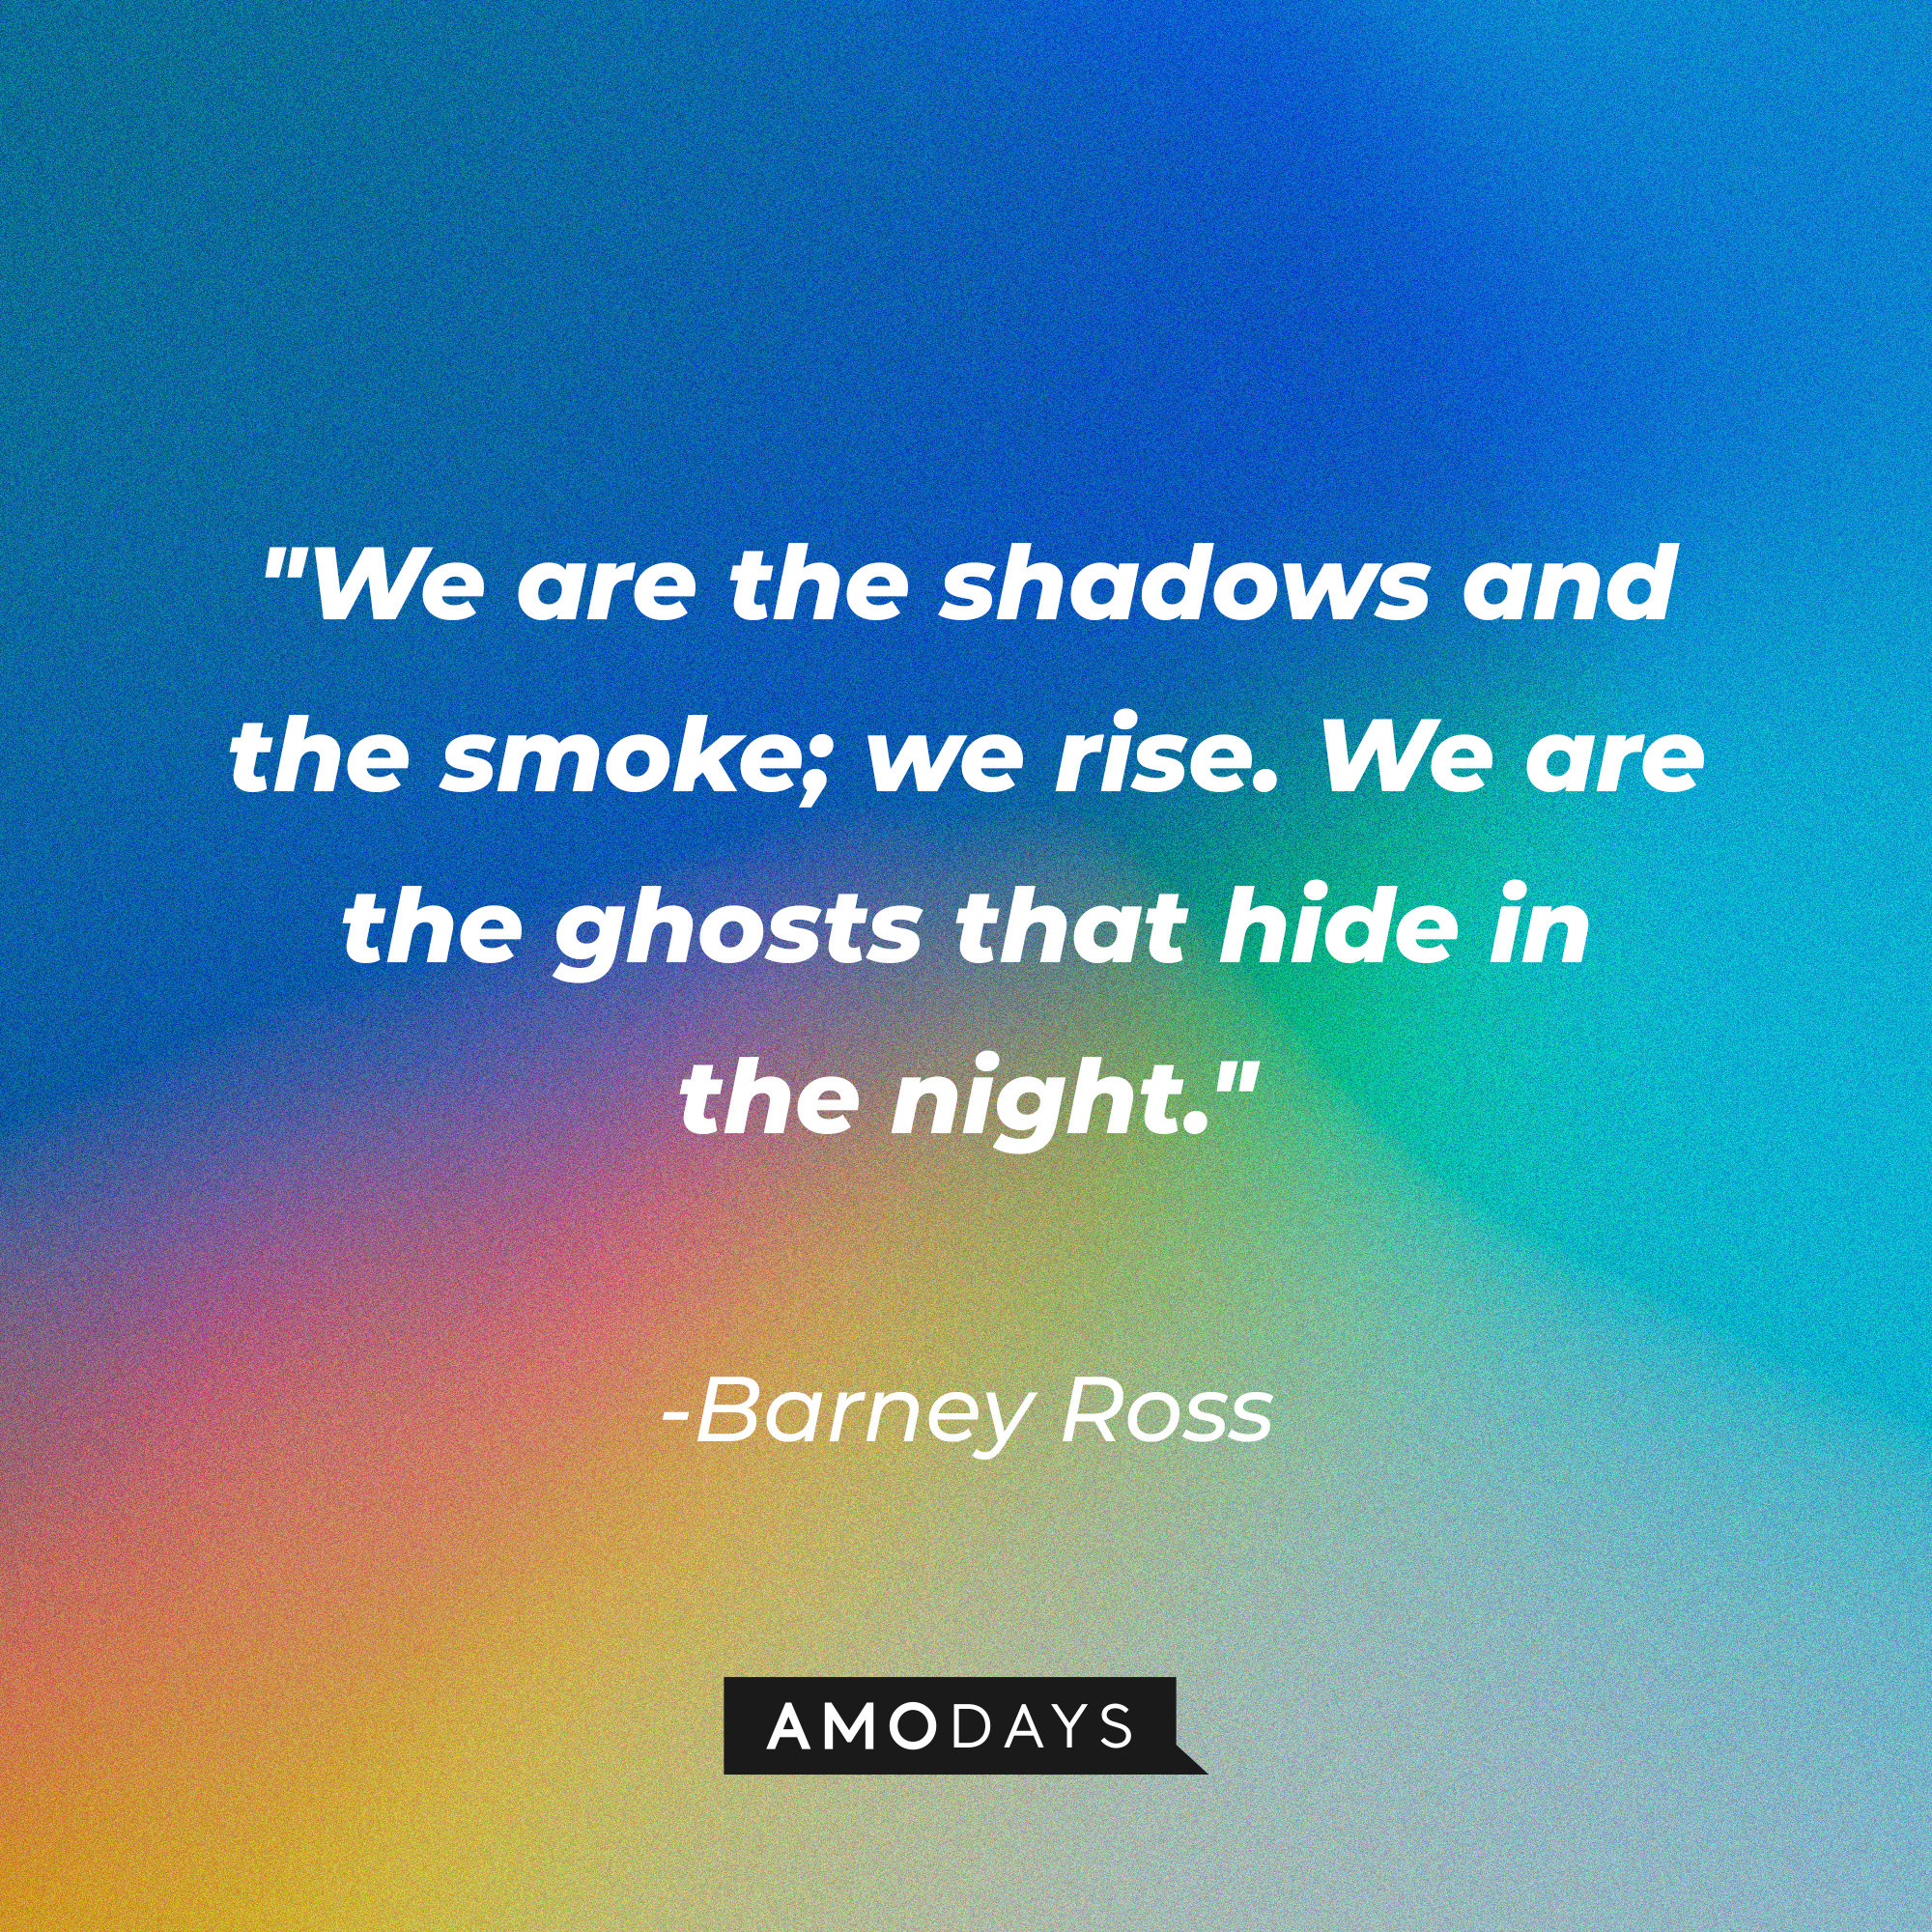 Barney Ross’s quote: "We are the shadows and the smoke, we rise. We are the ghosts that hide in the night." | Source: AmoDays